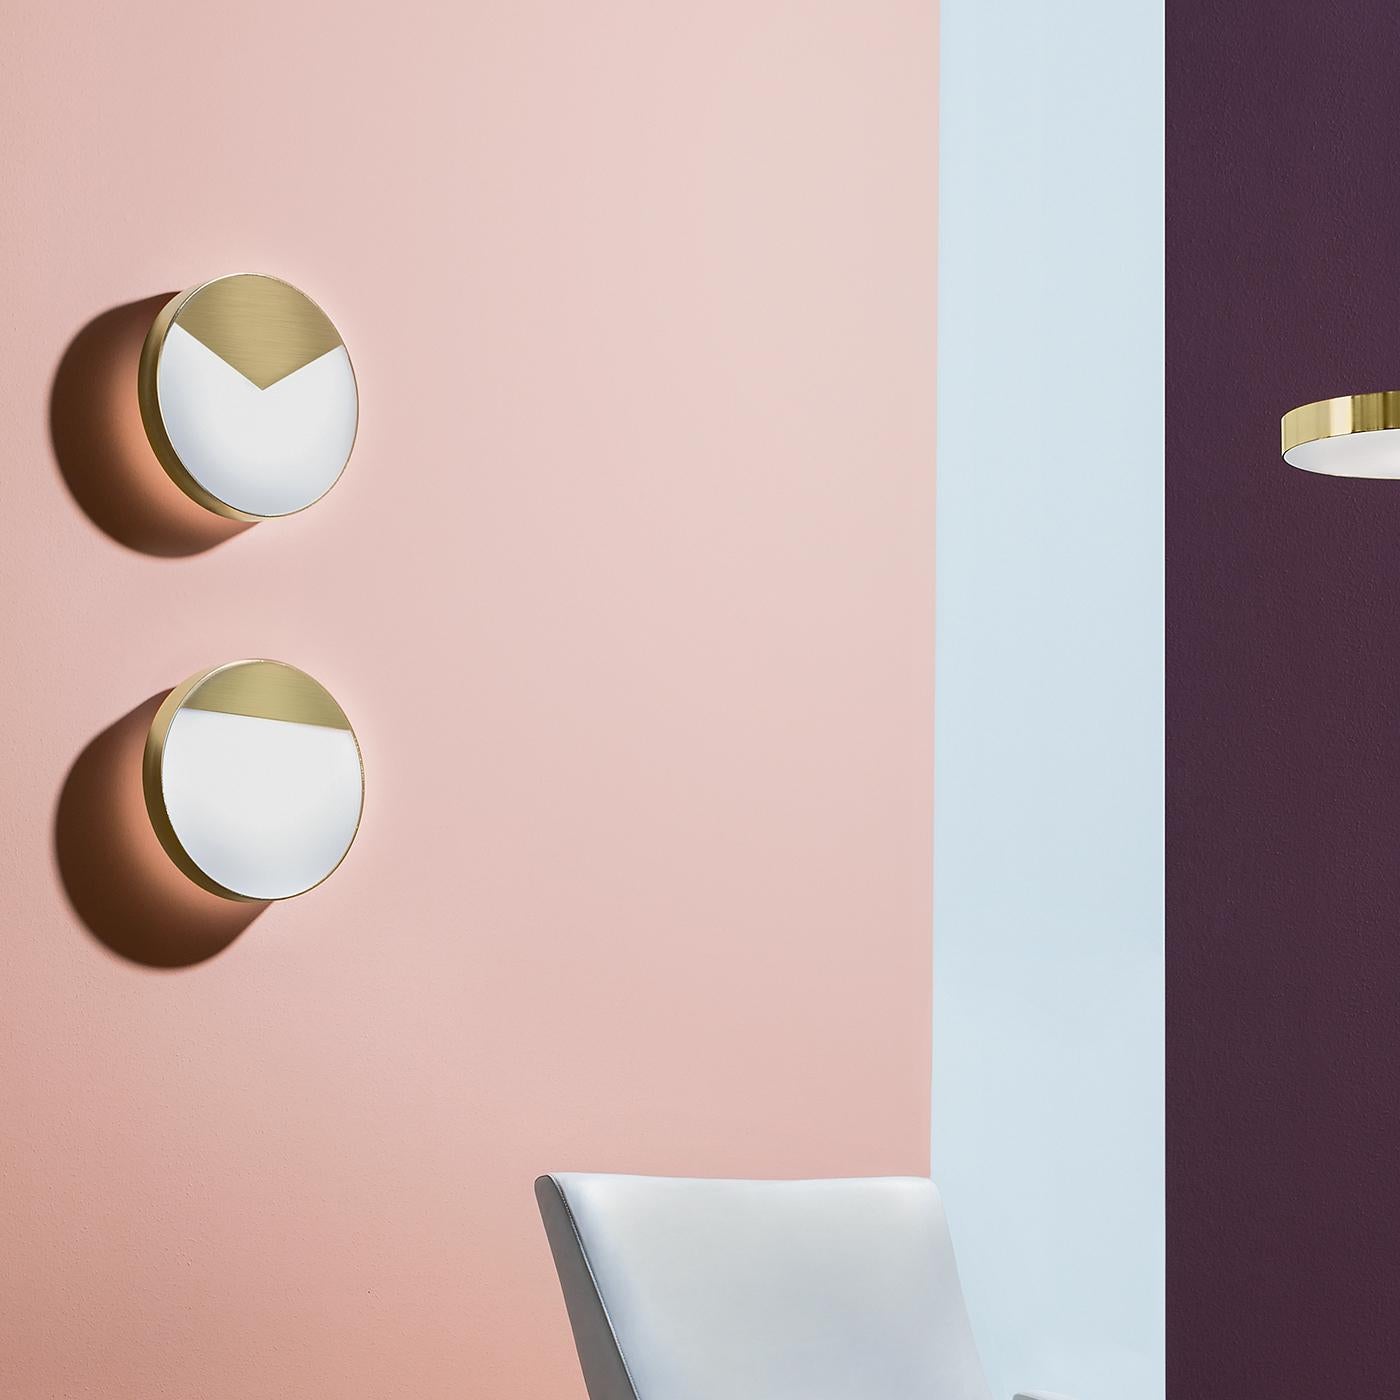 This exquisite metal sconce by Matteo Zorzenoni is an exercise in geometric and elegant lines. Attached to the circular brass structure by means of magnets, a small, triangular metal sheet with a satin brass finish adds a sophisticated accent